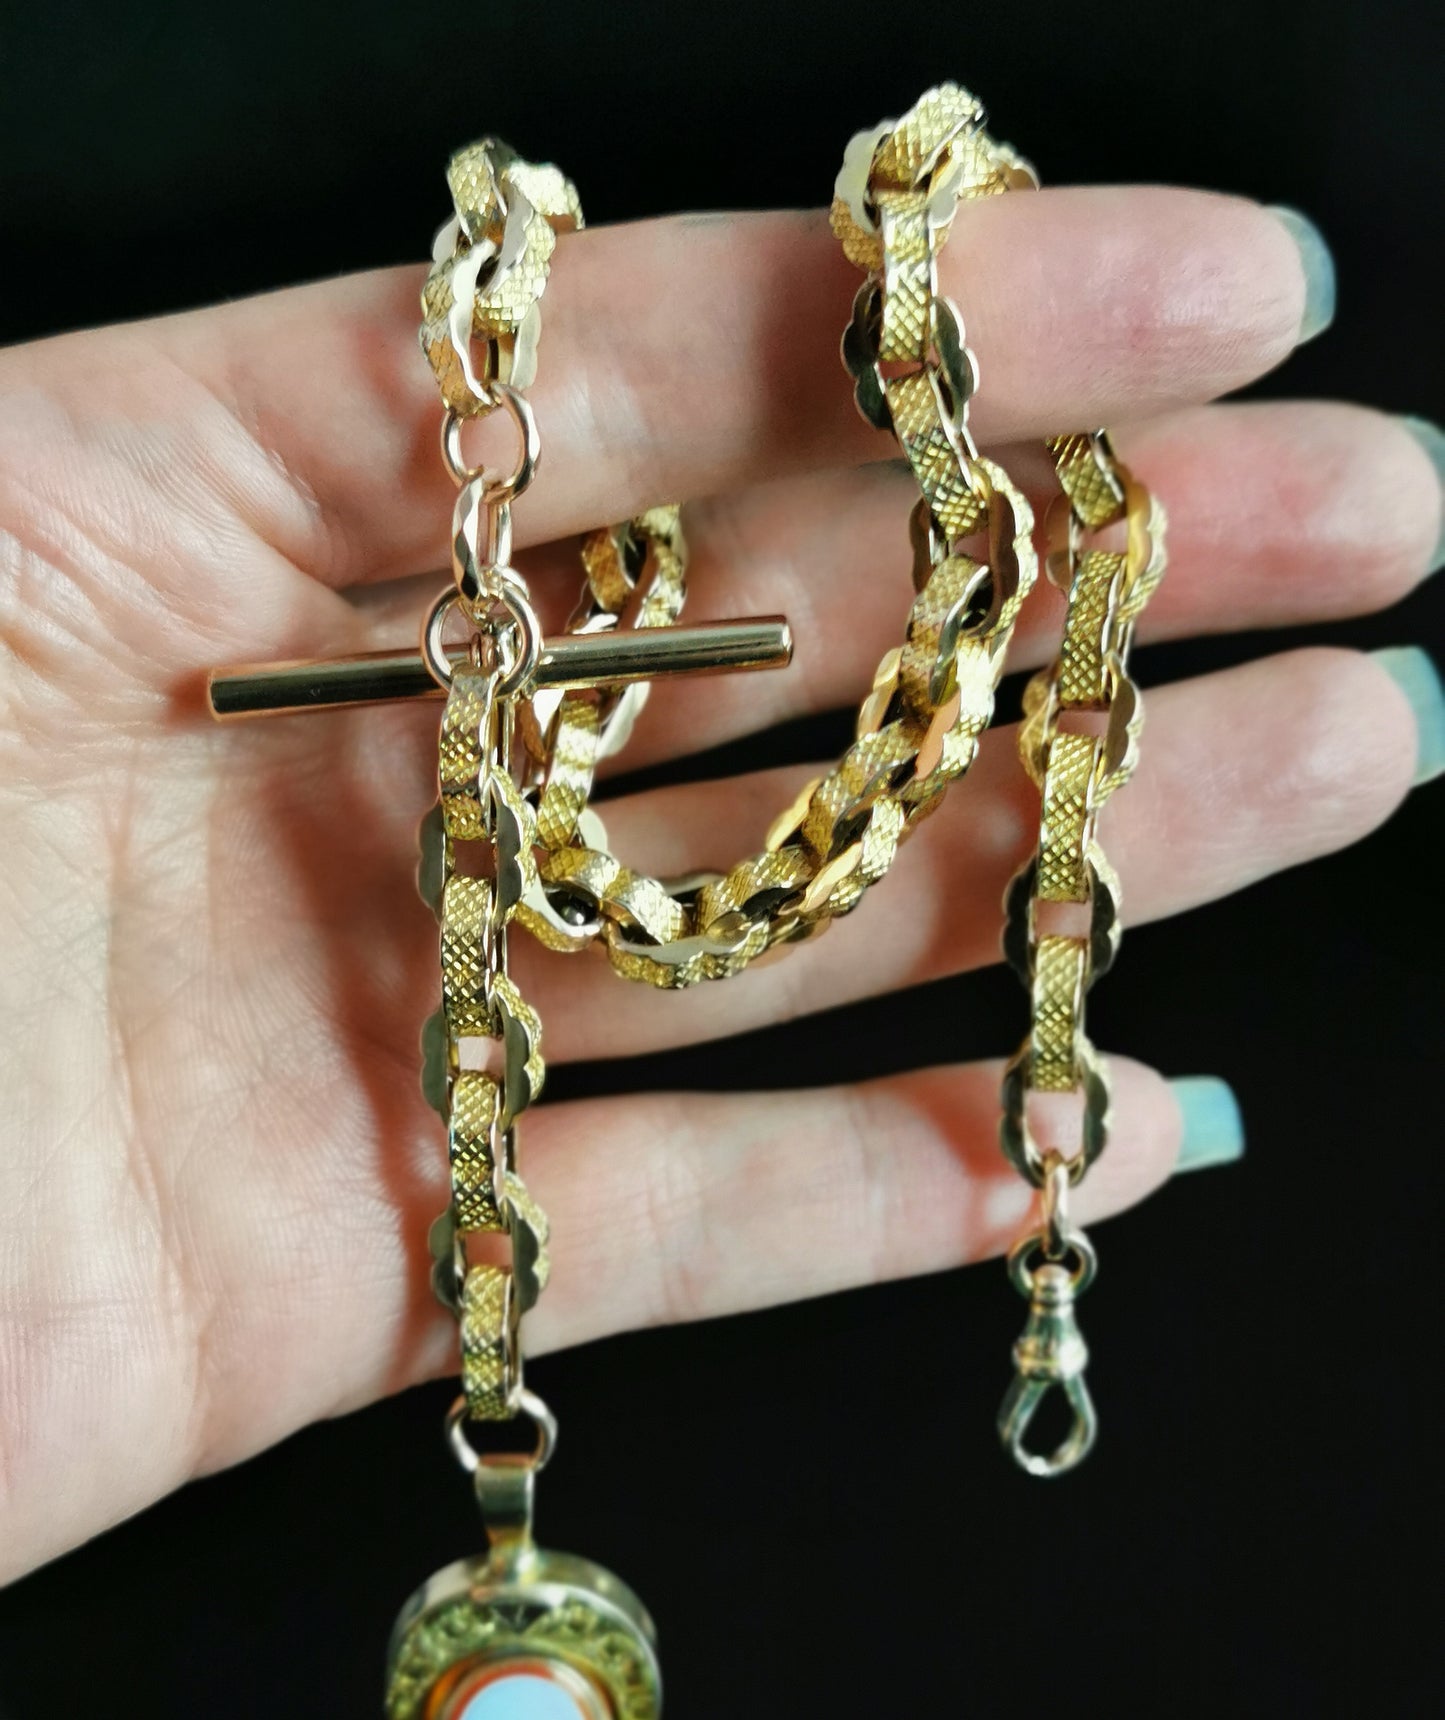 Antique 9ct yellow gold fancy link Albert chain, watch chain necklace, Horseshoe swivel fob